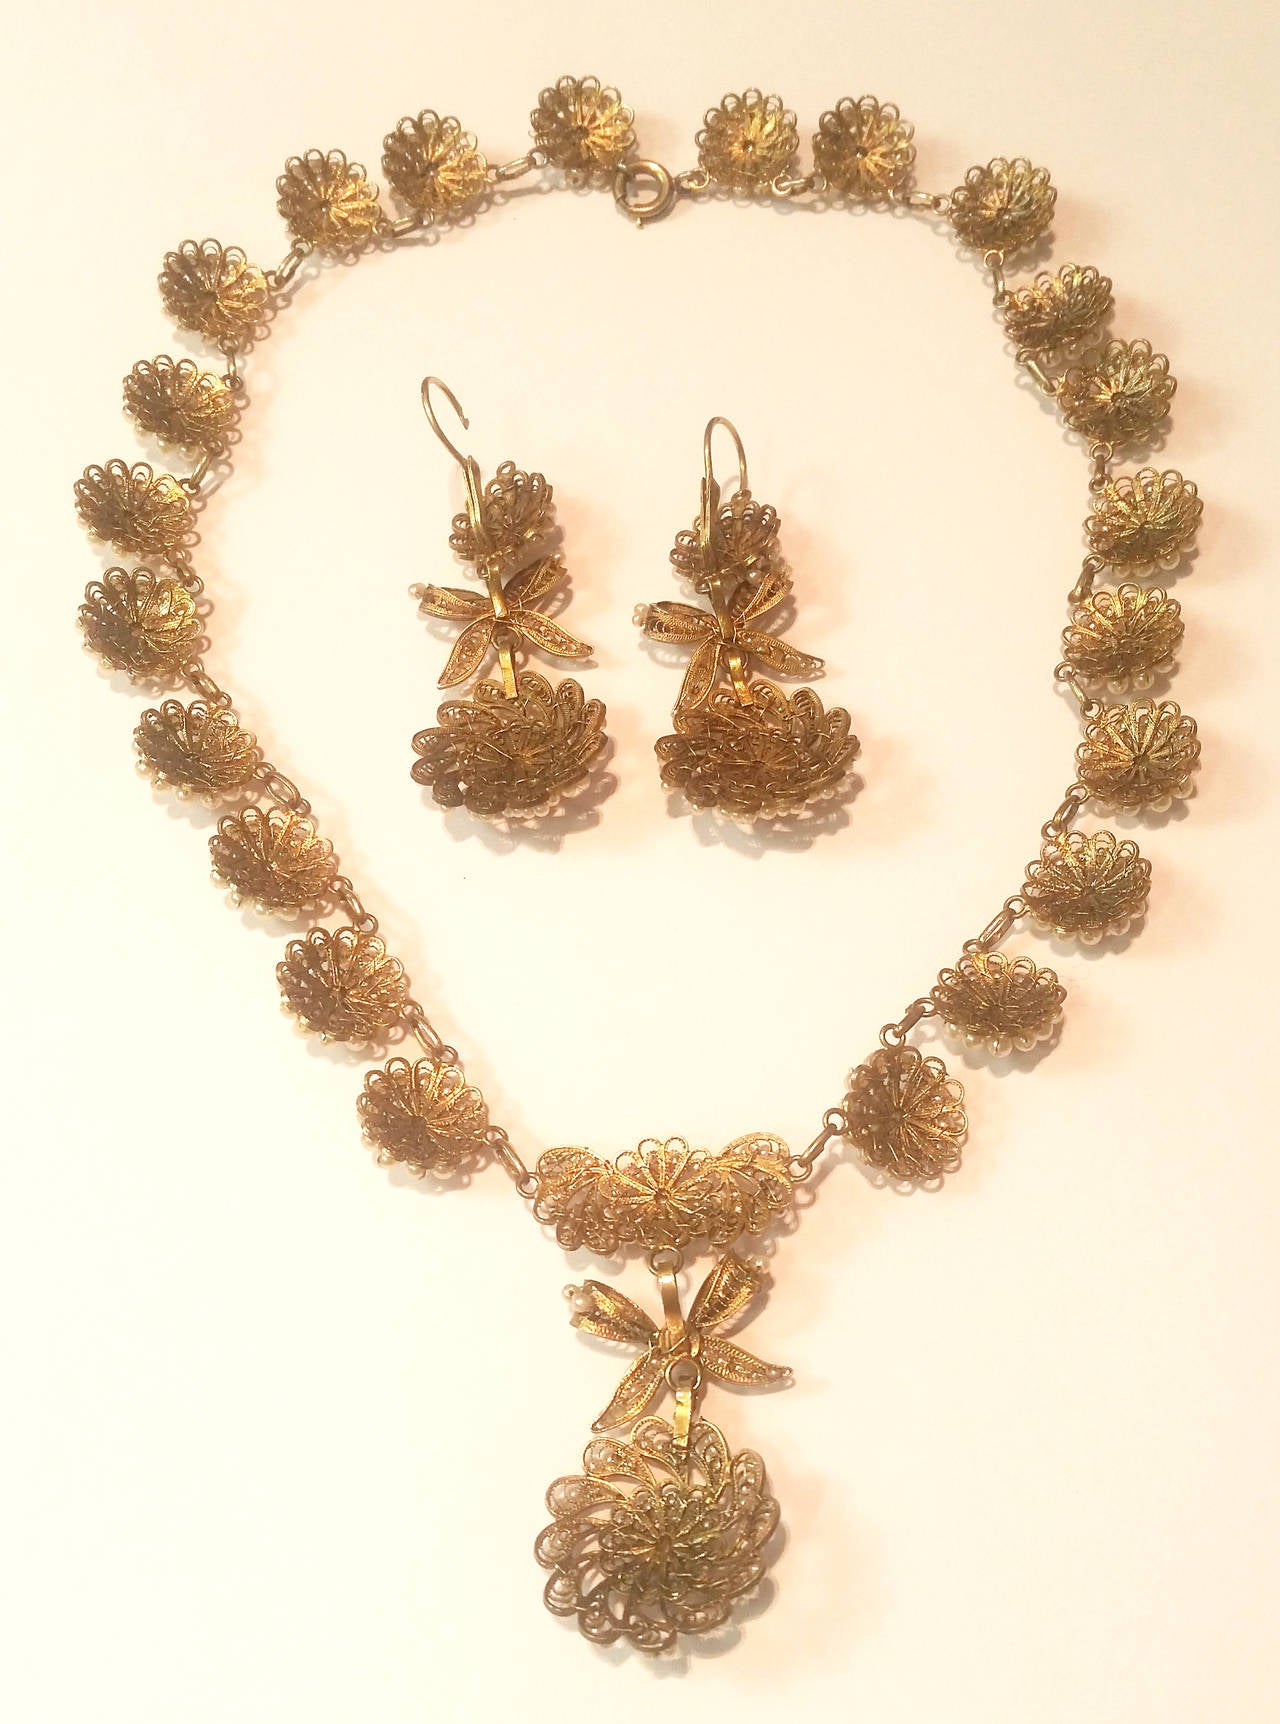 19th Century Pearl Gold Filigree Rosette Necklace and Earrings For Sale 3